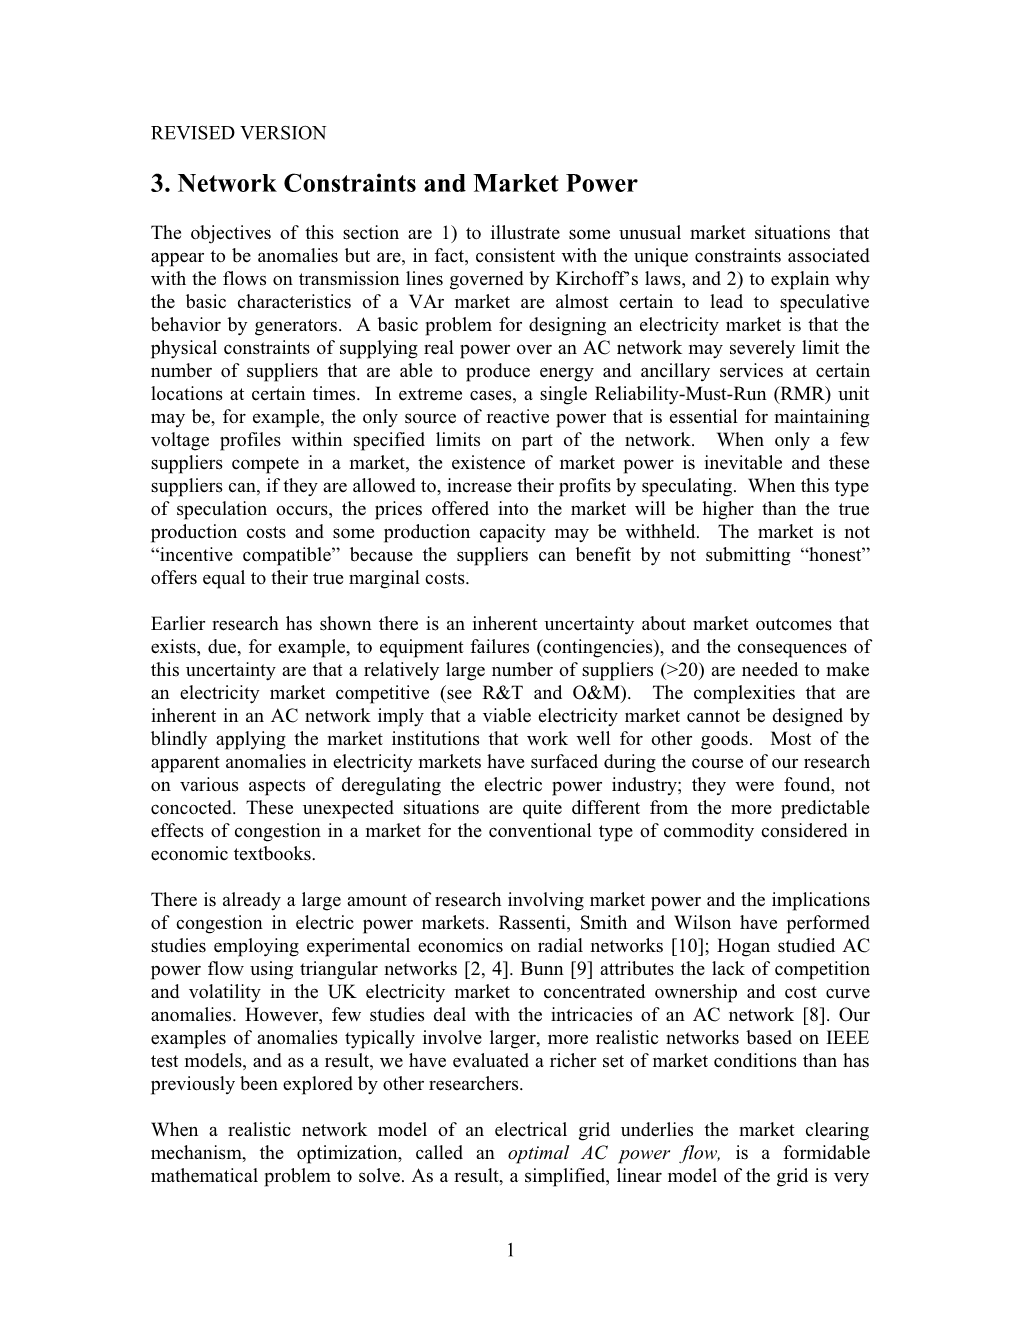 3. Network Constraints and Market Power